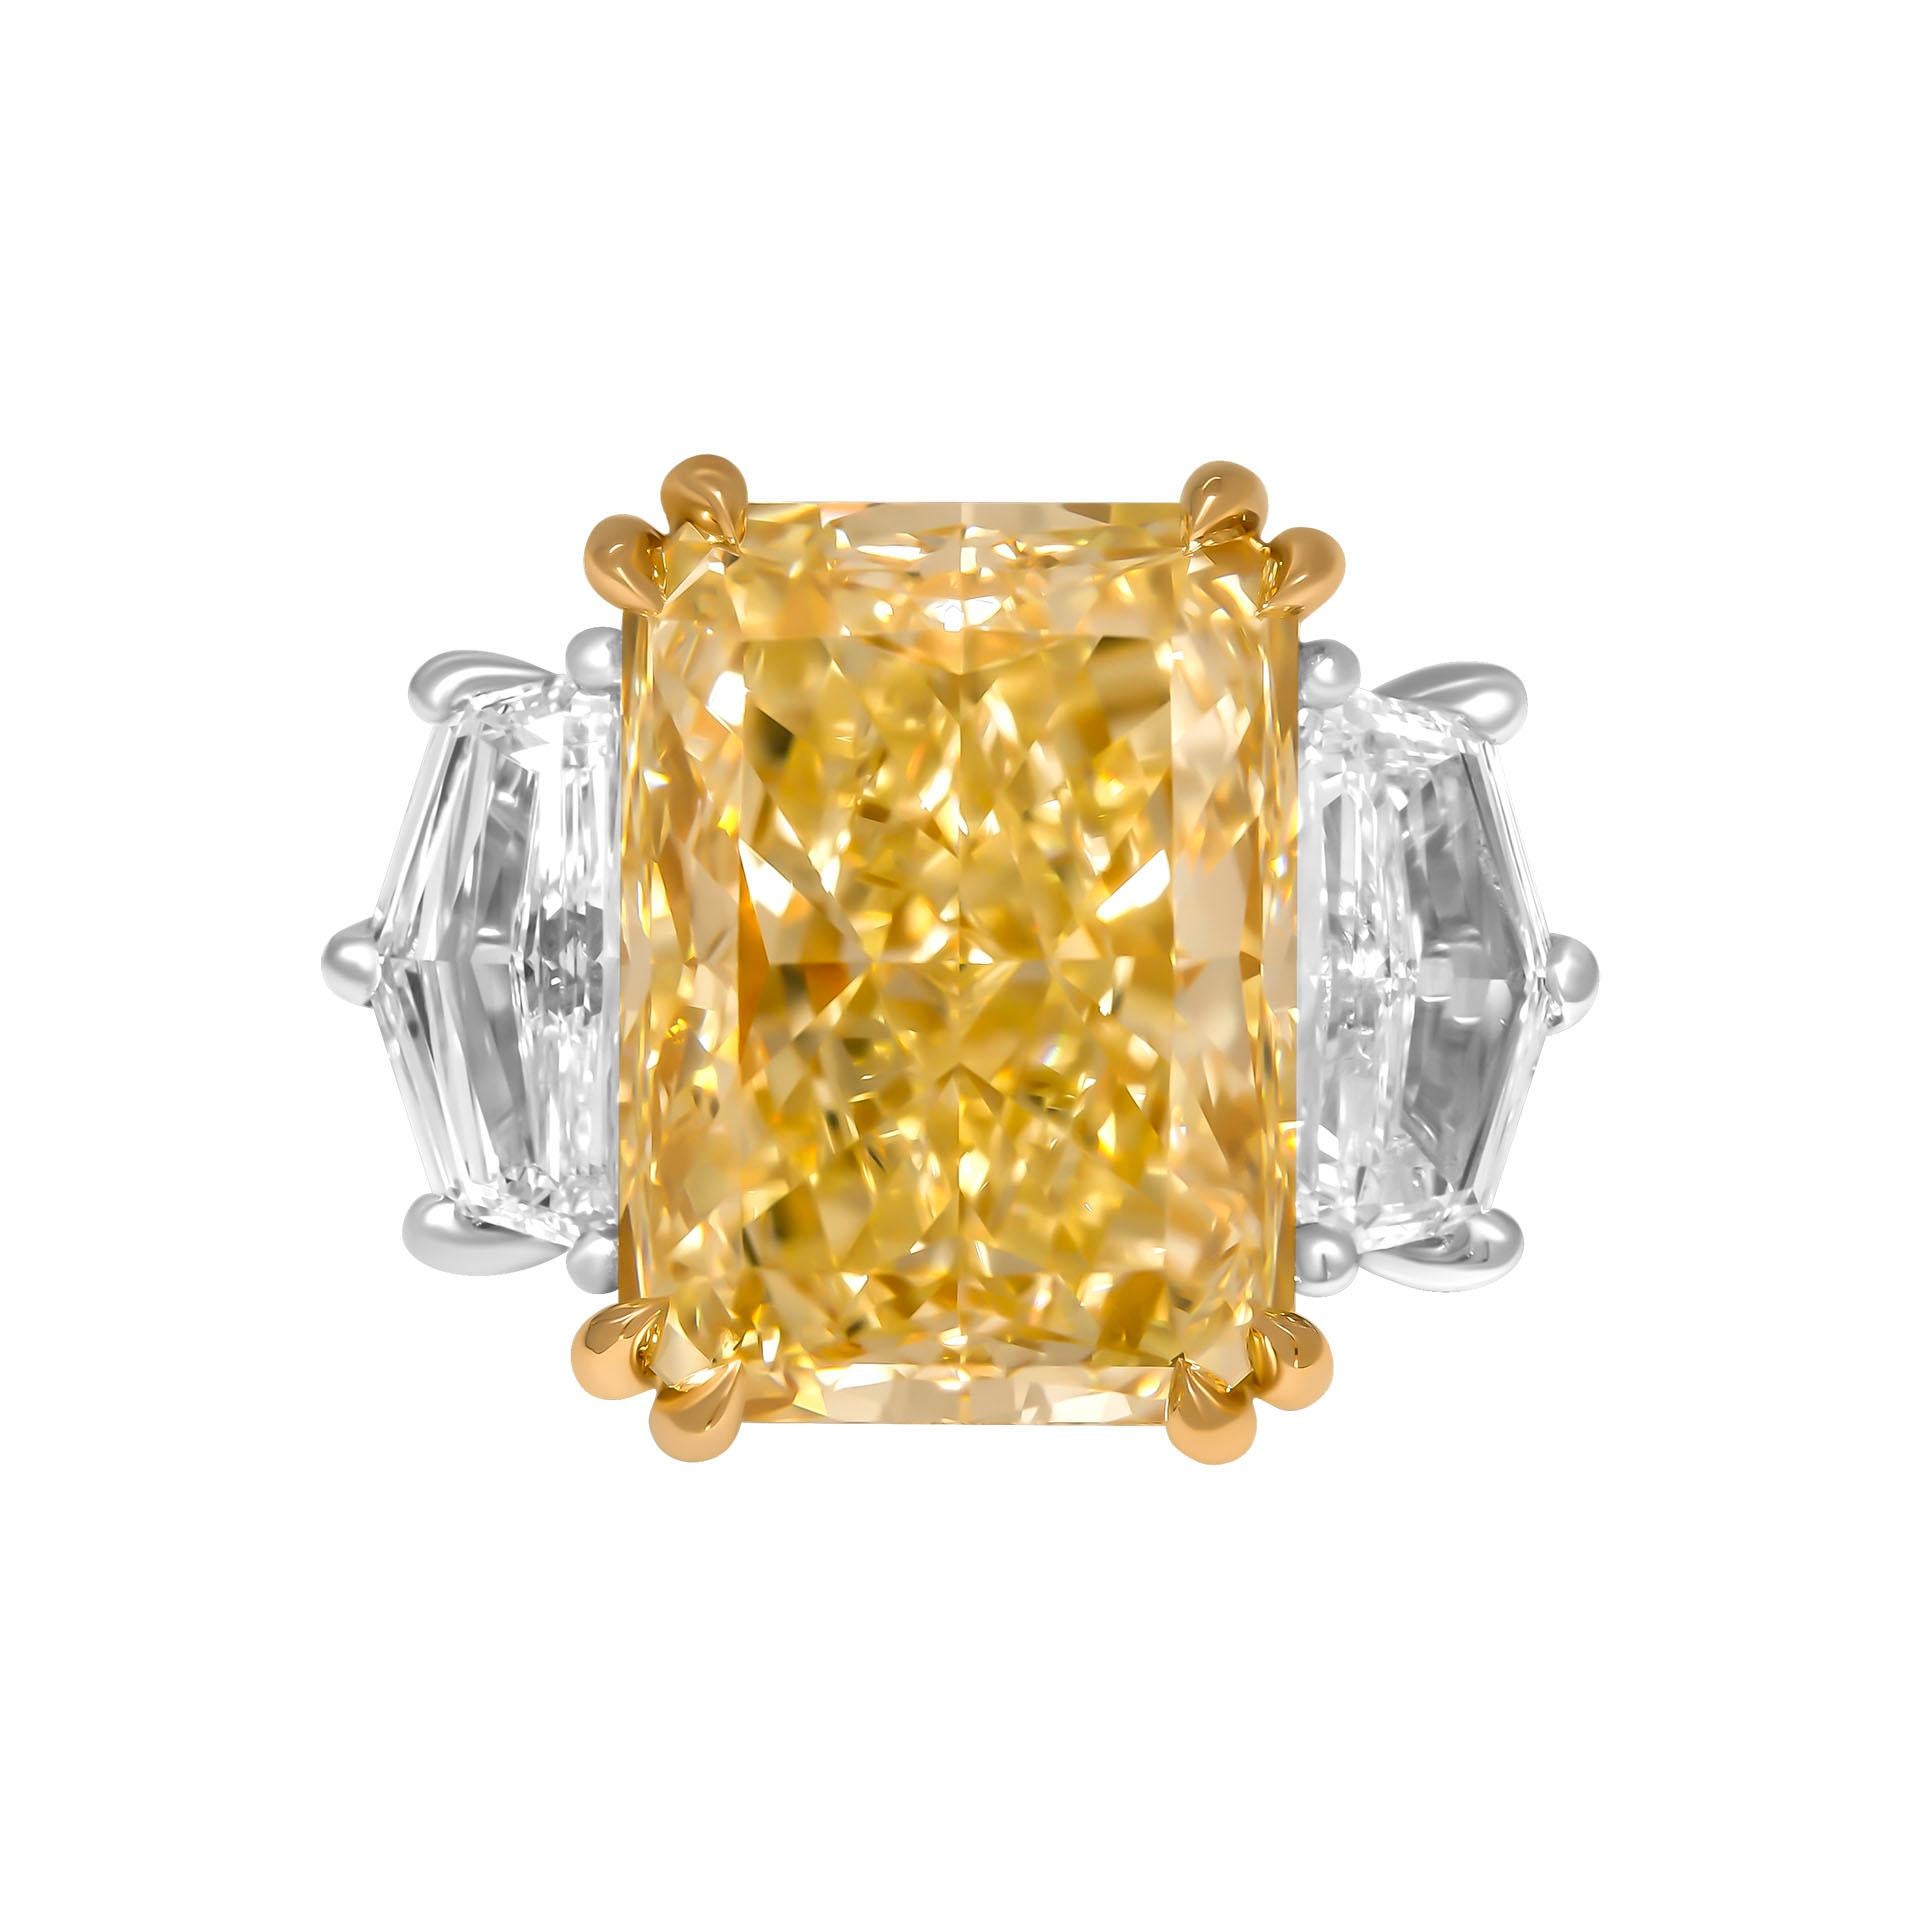 3 stone ring in Platinum & 18K Yellow Gold

Center: 11.18ct Natural Fancy Light Yellow Even VVS2 Radiant shape Diamond GIA#2225264298 

Side stones Cadillac Shape: 
1.01ct D color Flawless  GIA#1289883675
1.12 D color Internally Flawless